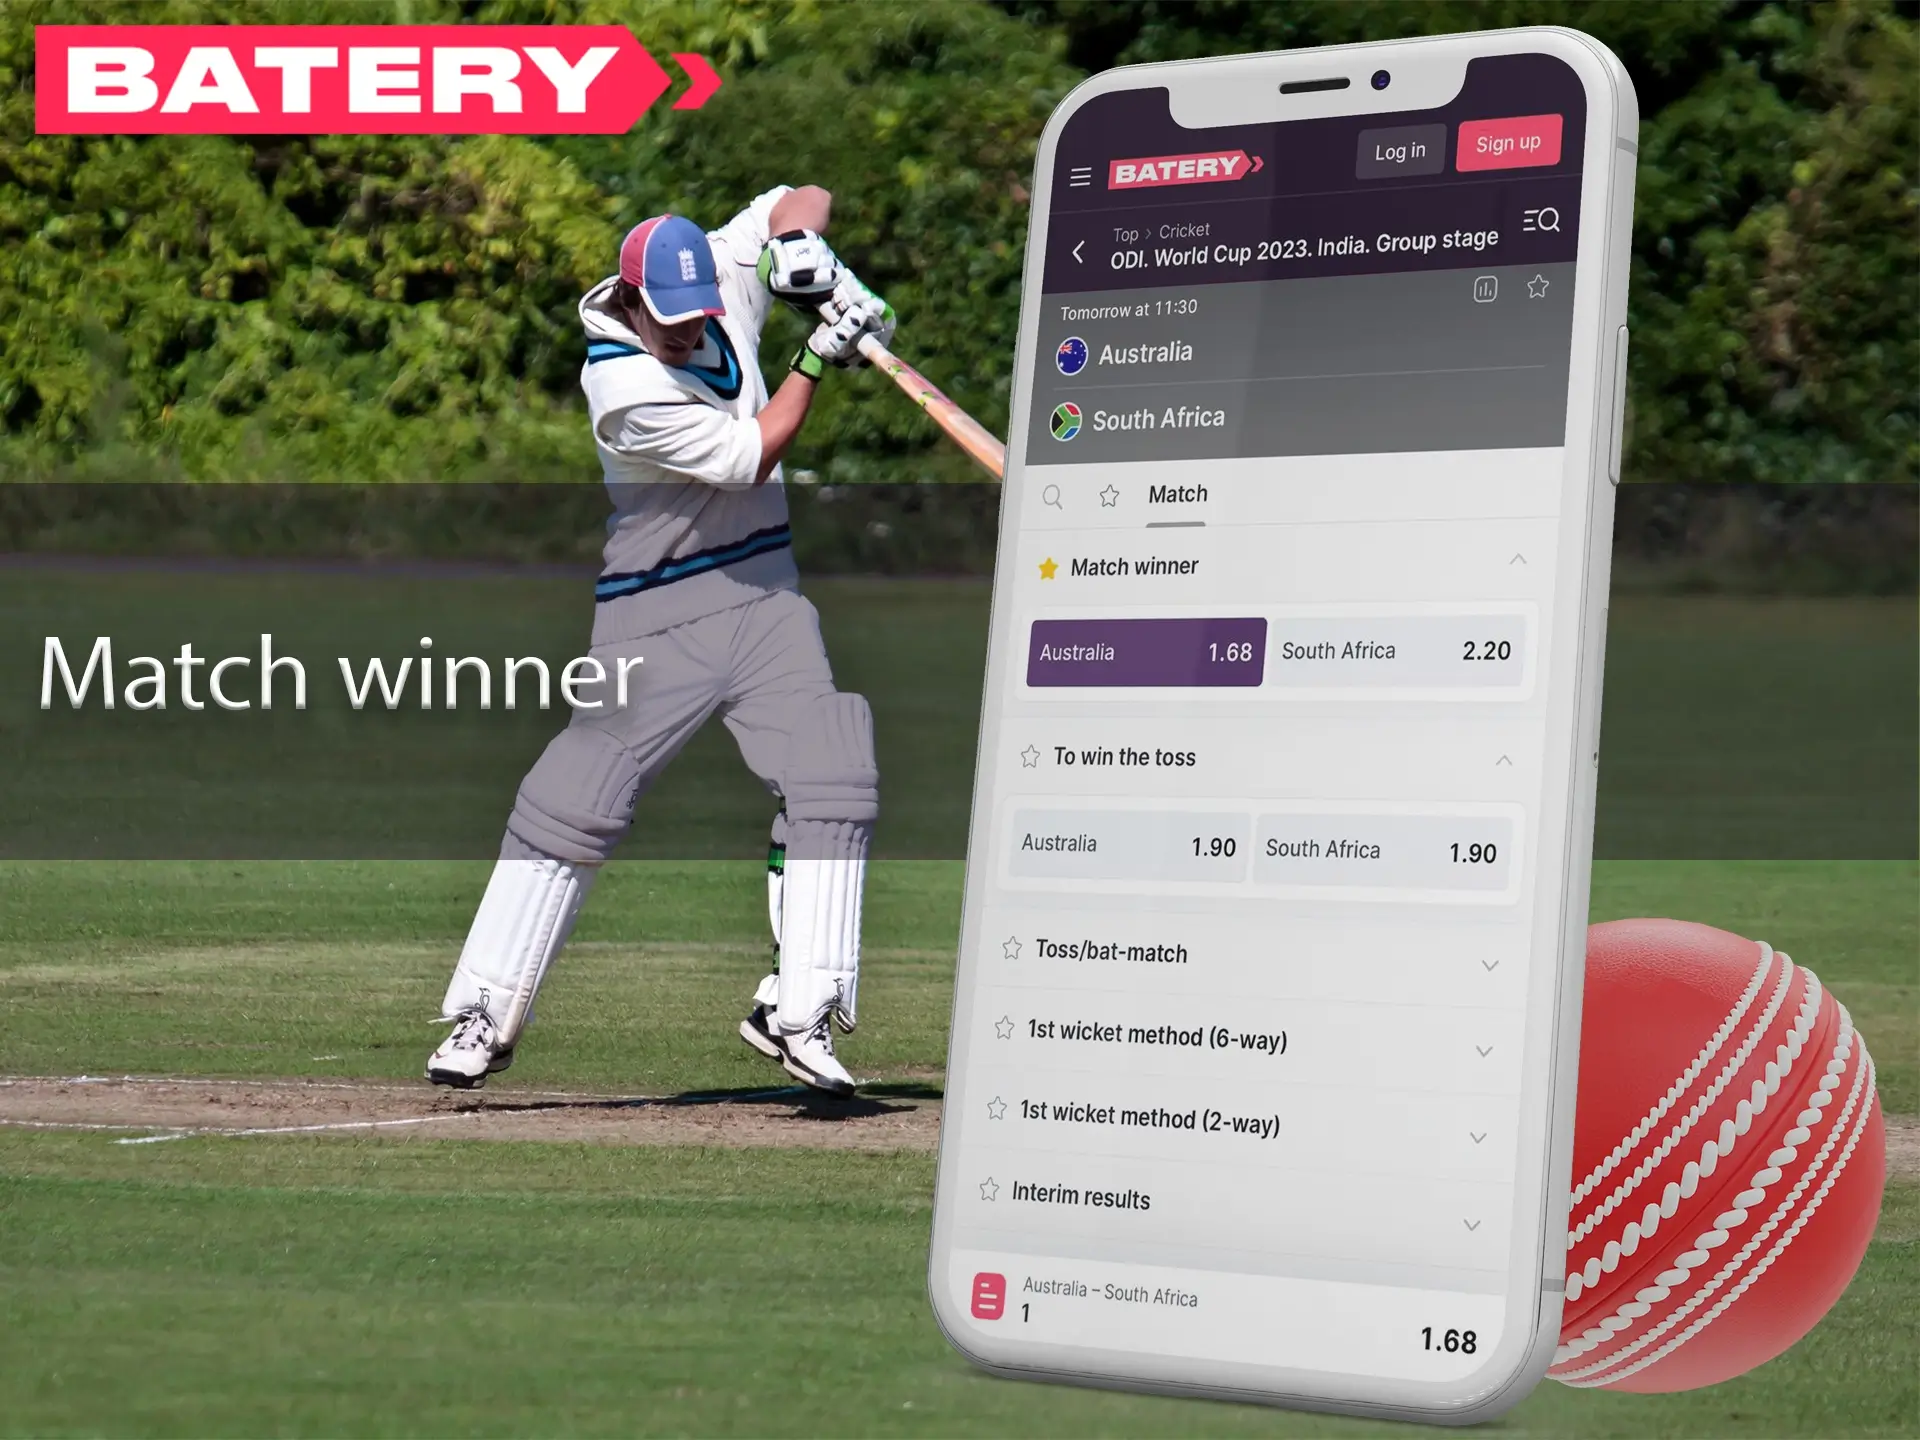 Bet on your favourite team, which is the favourite to win with Batery.